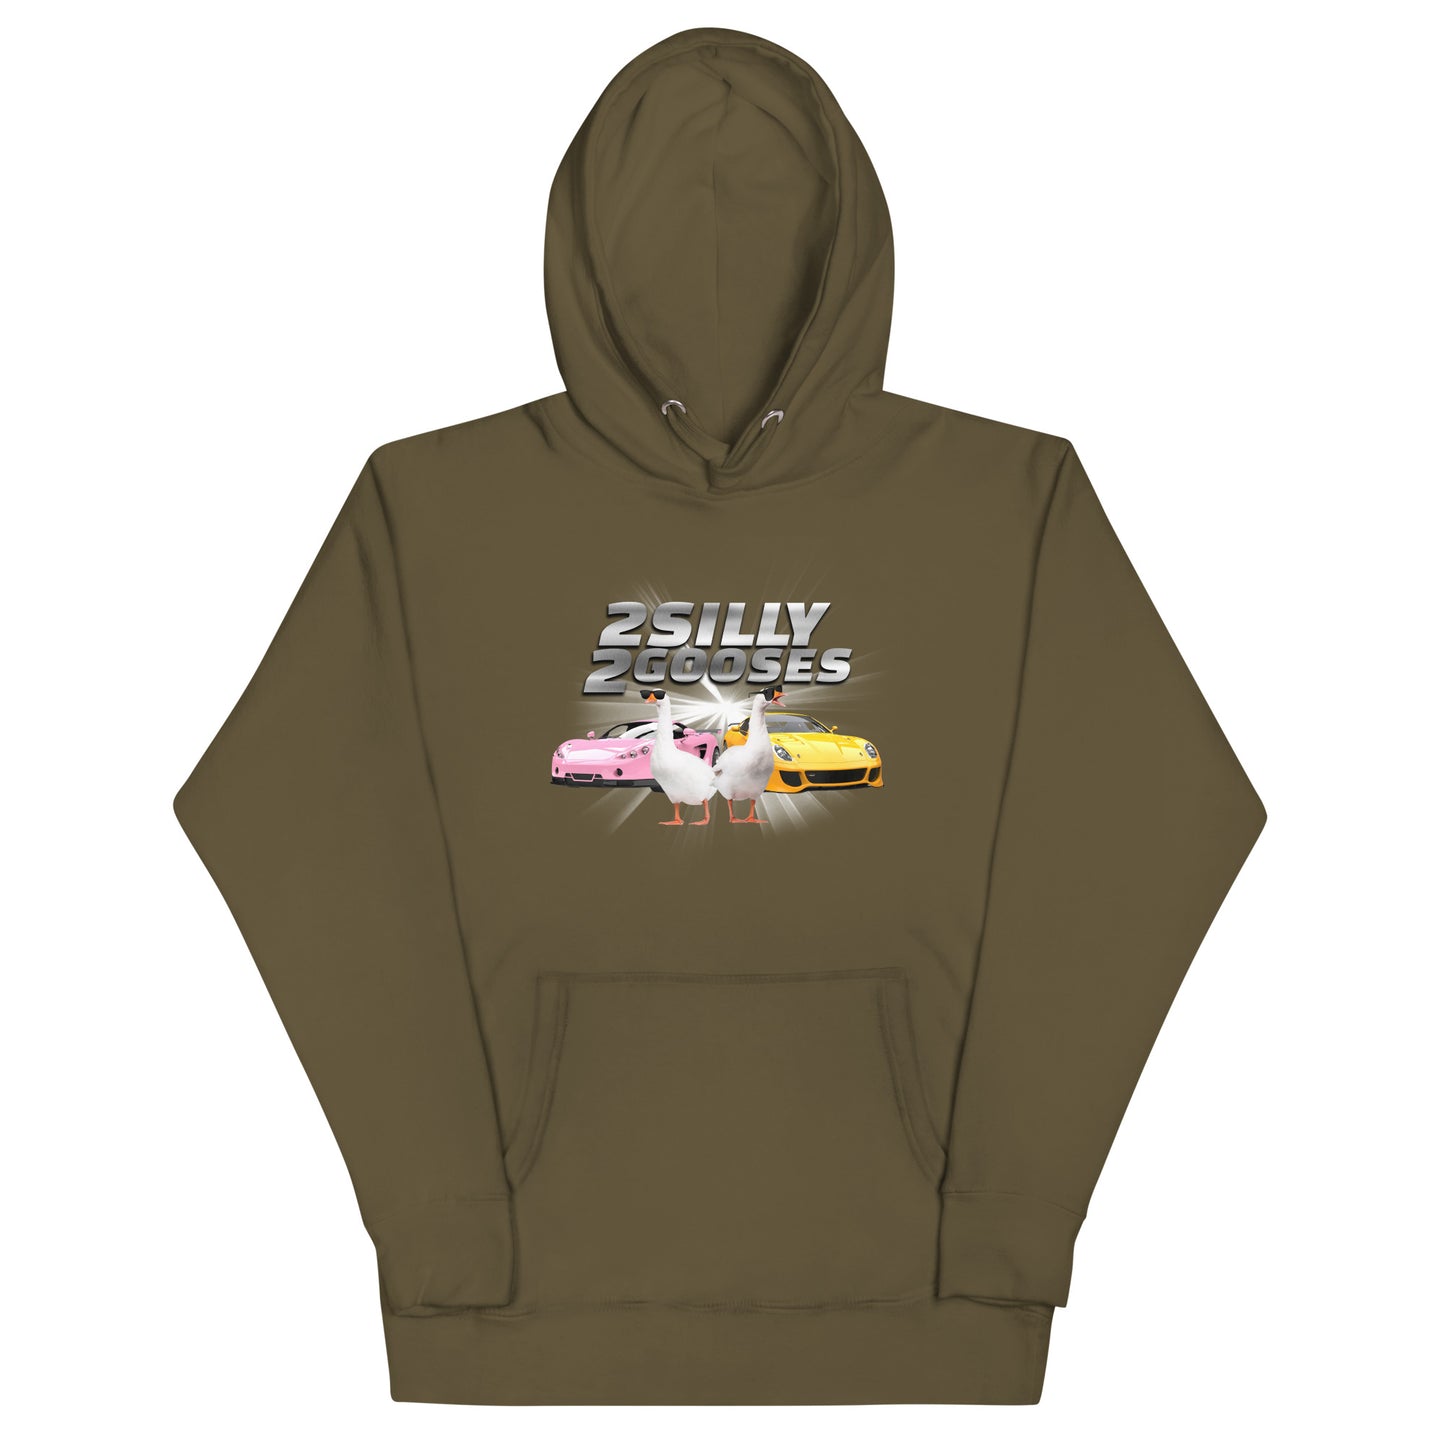 2 Silly 2 Gooses Unisex Hoodie